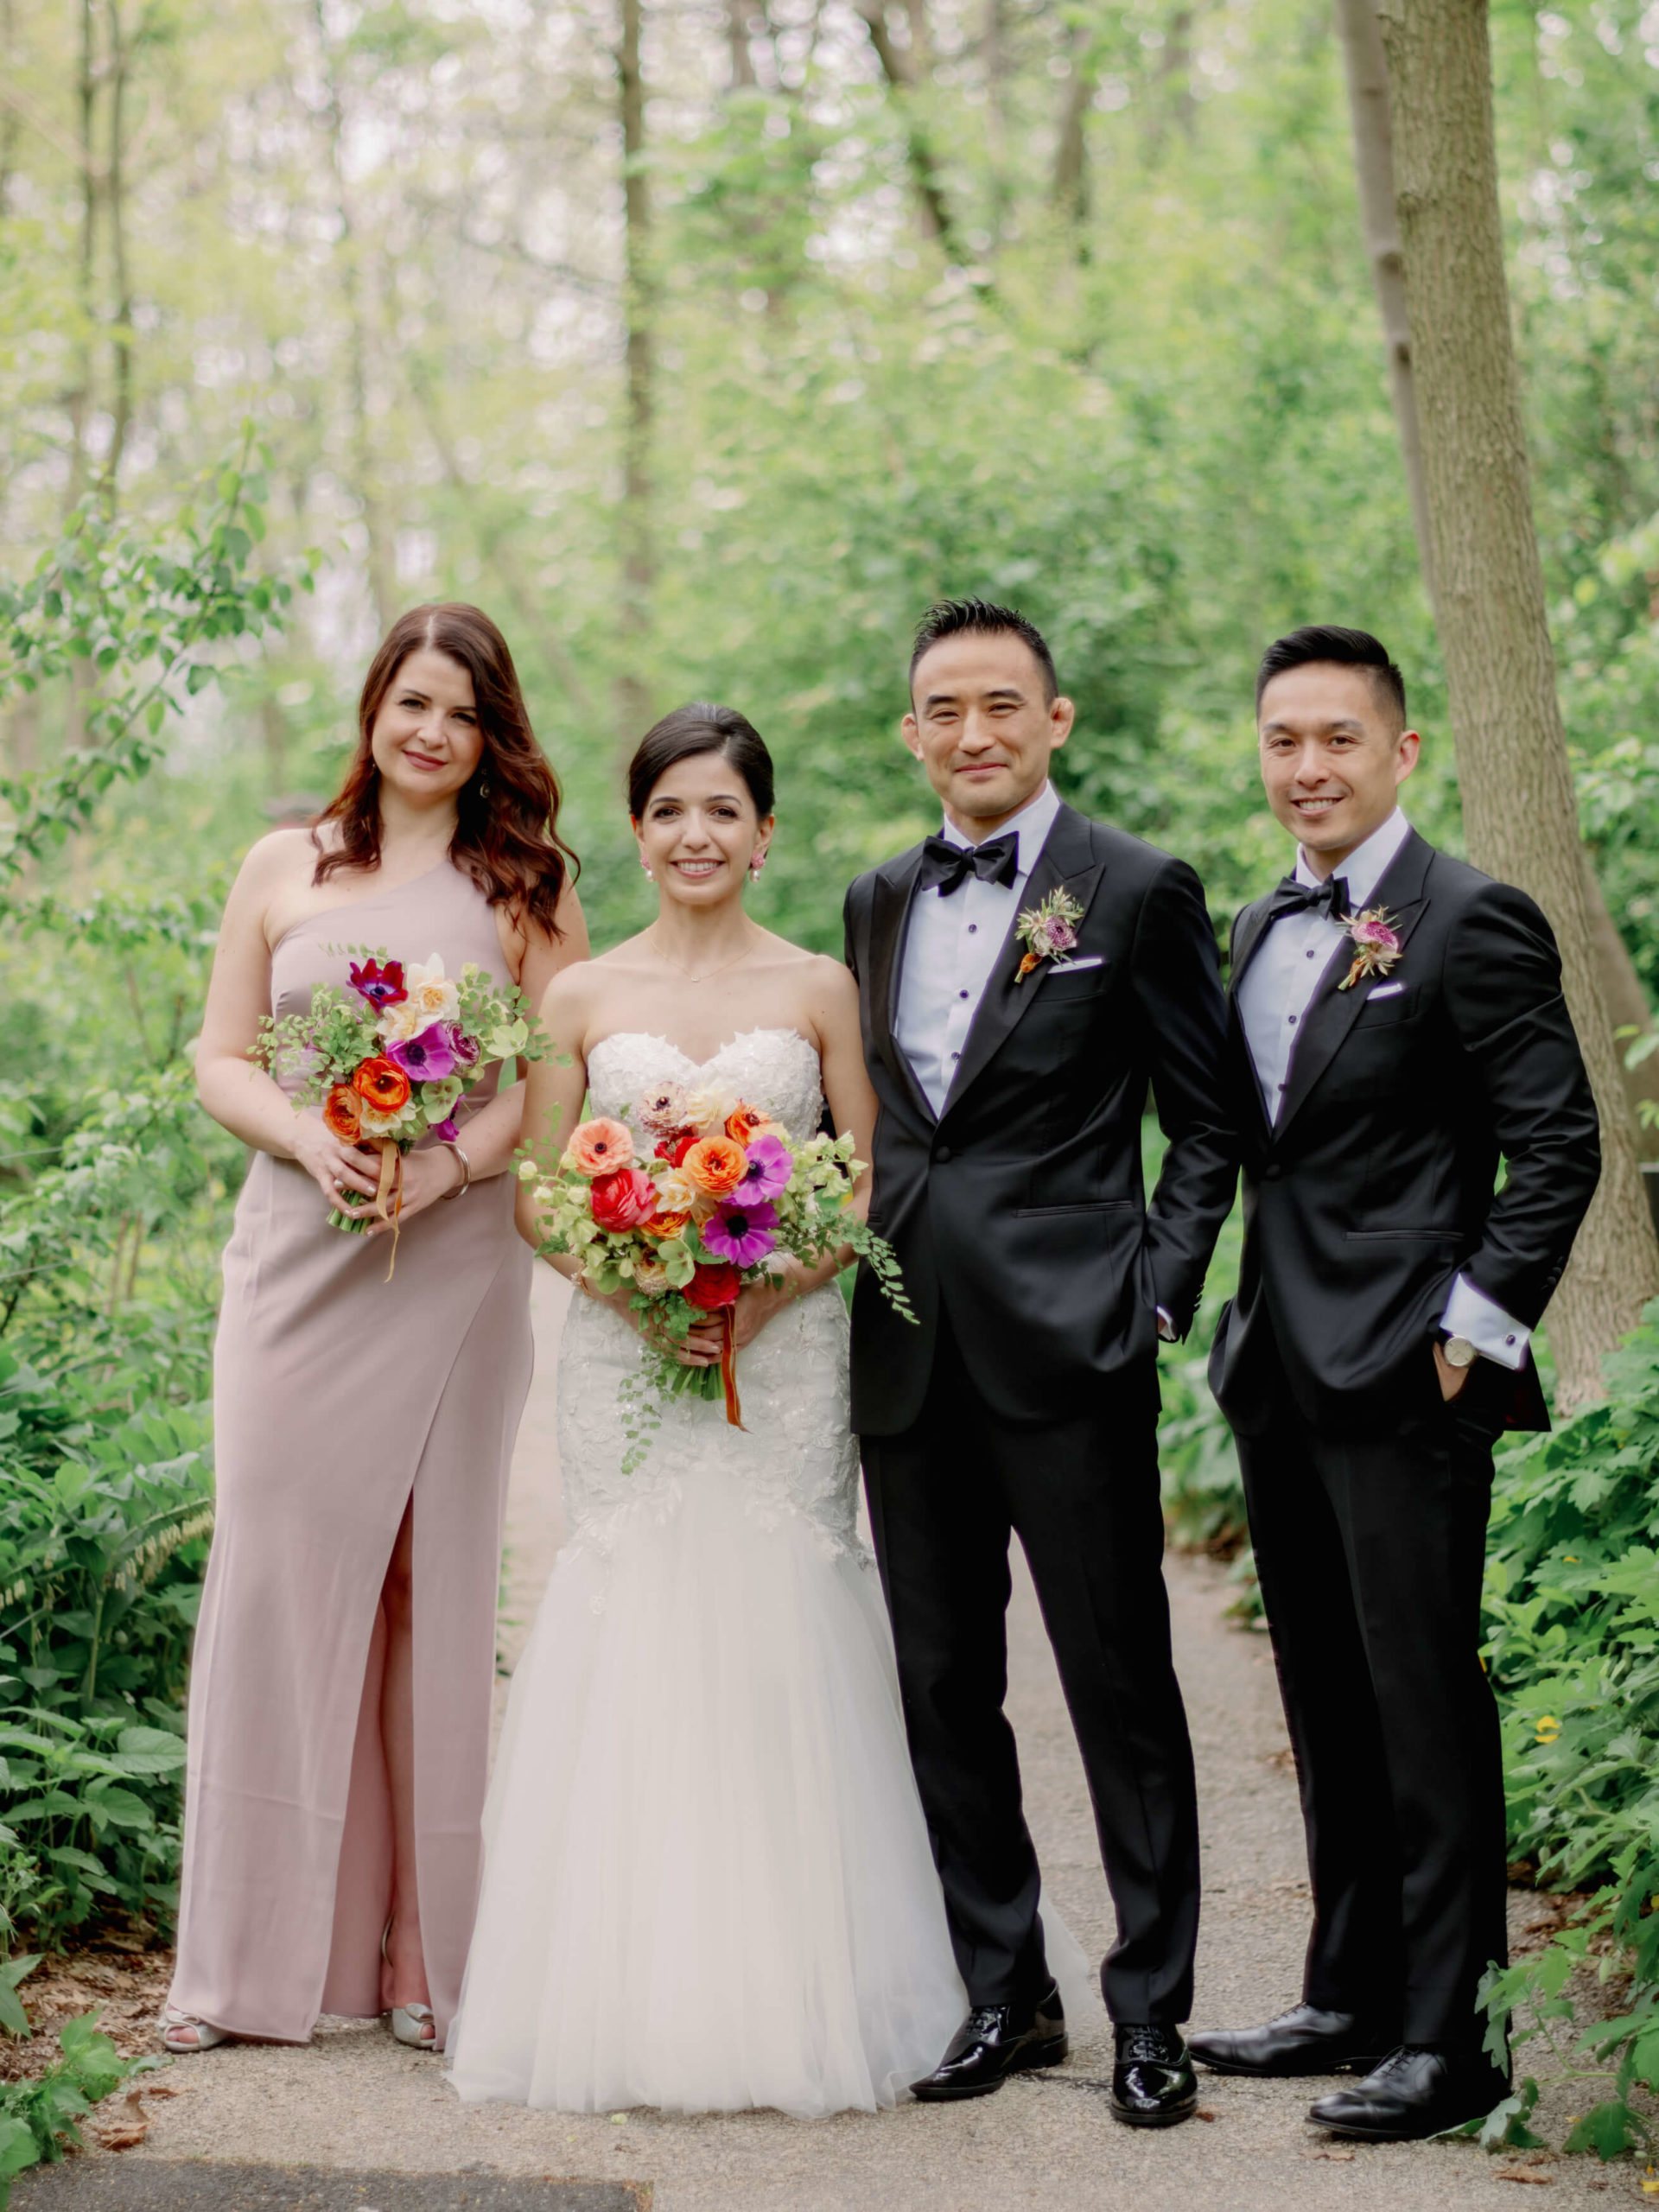 The bride and groom with the bridesmaid and groomsman. Hours of wedding photography image by Jenny Fu Studio NYC.